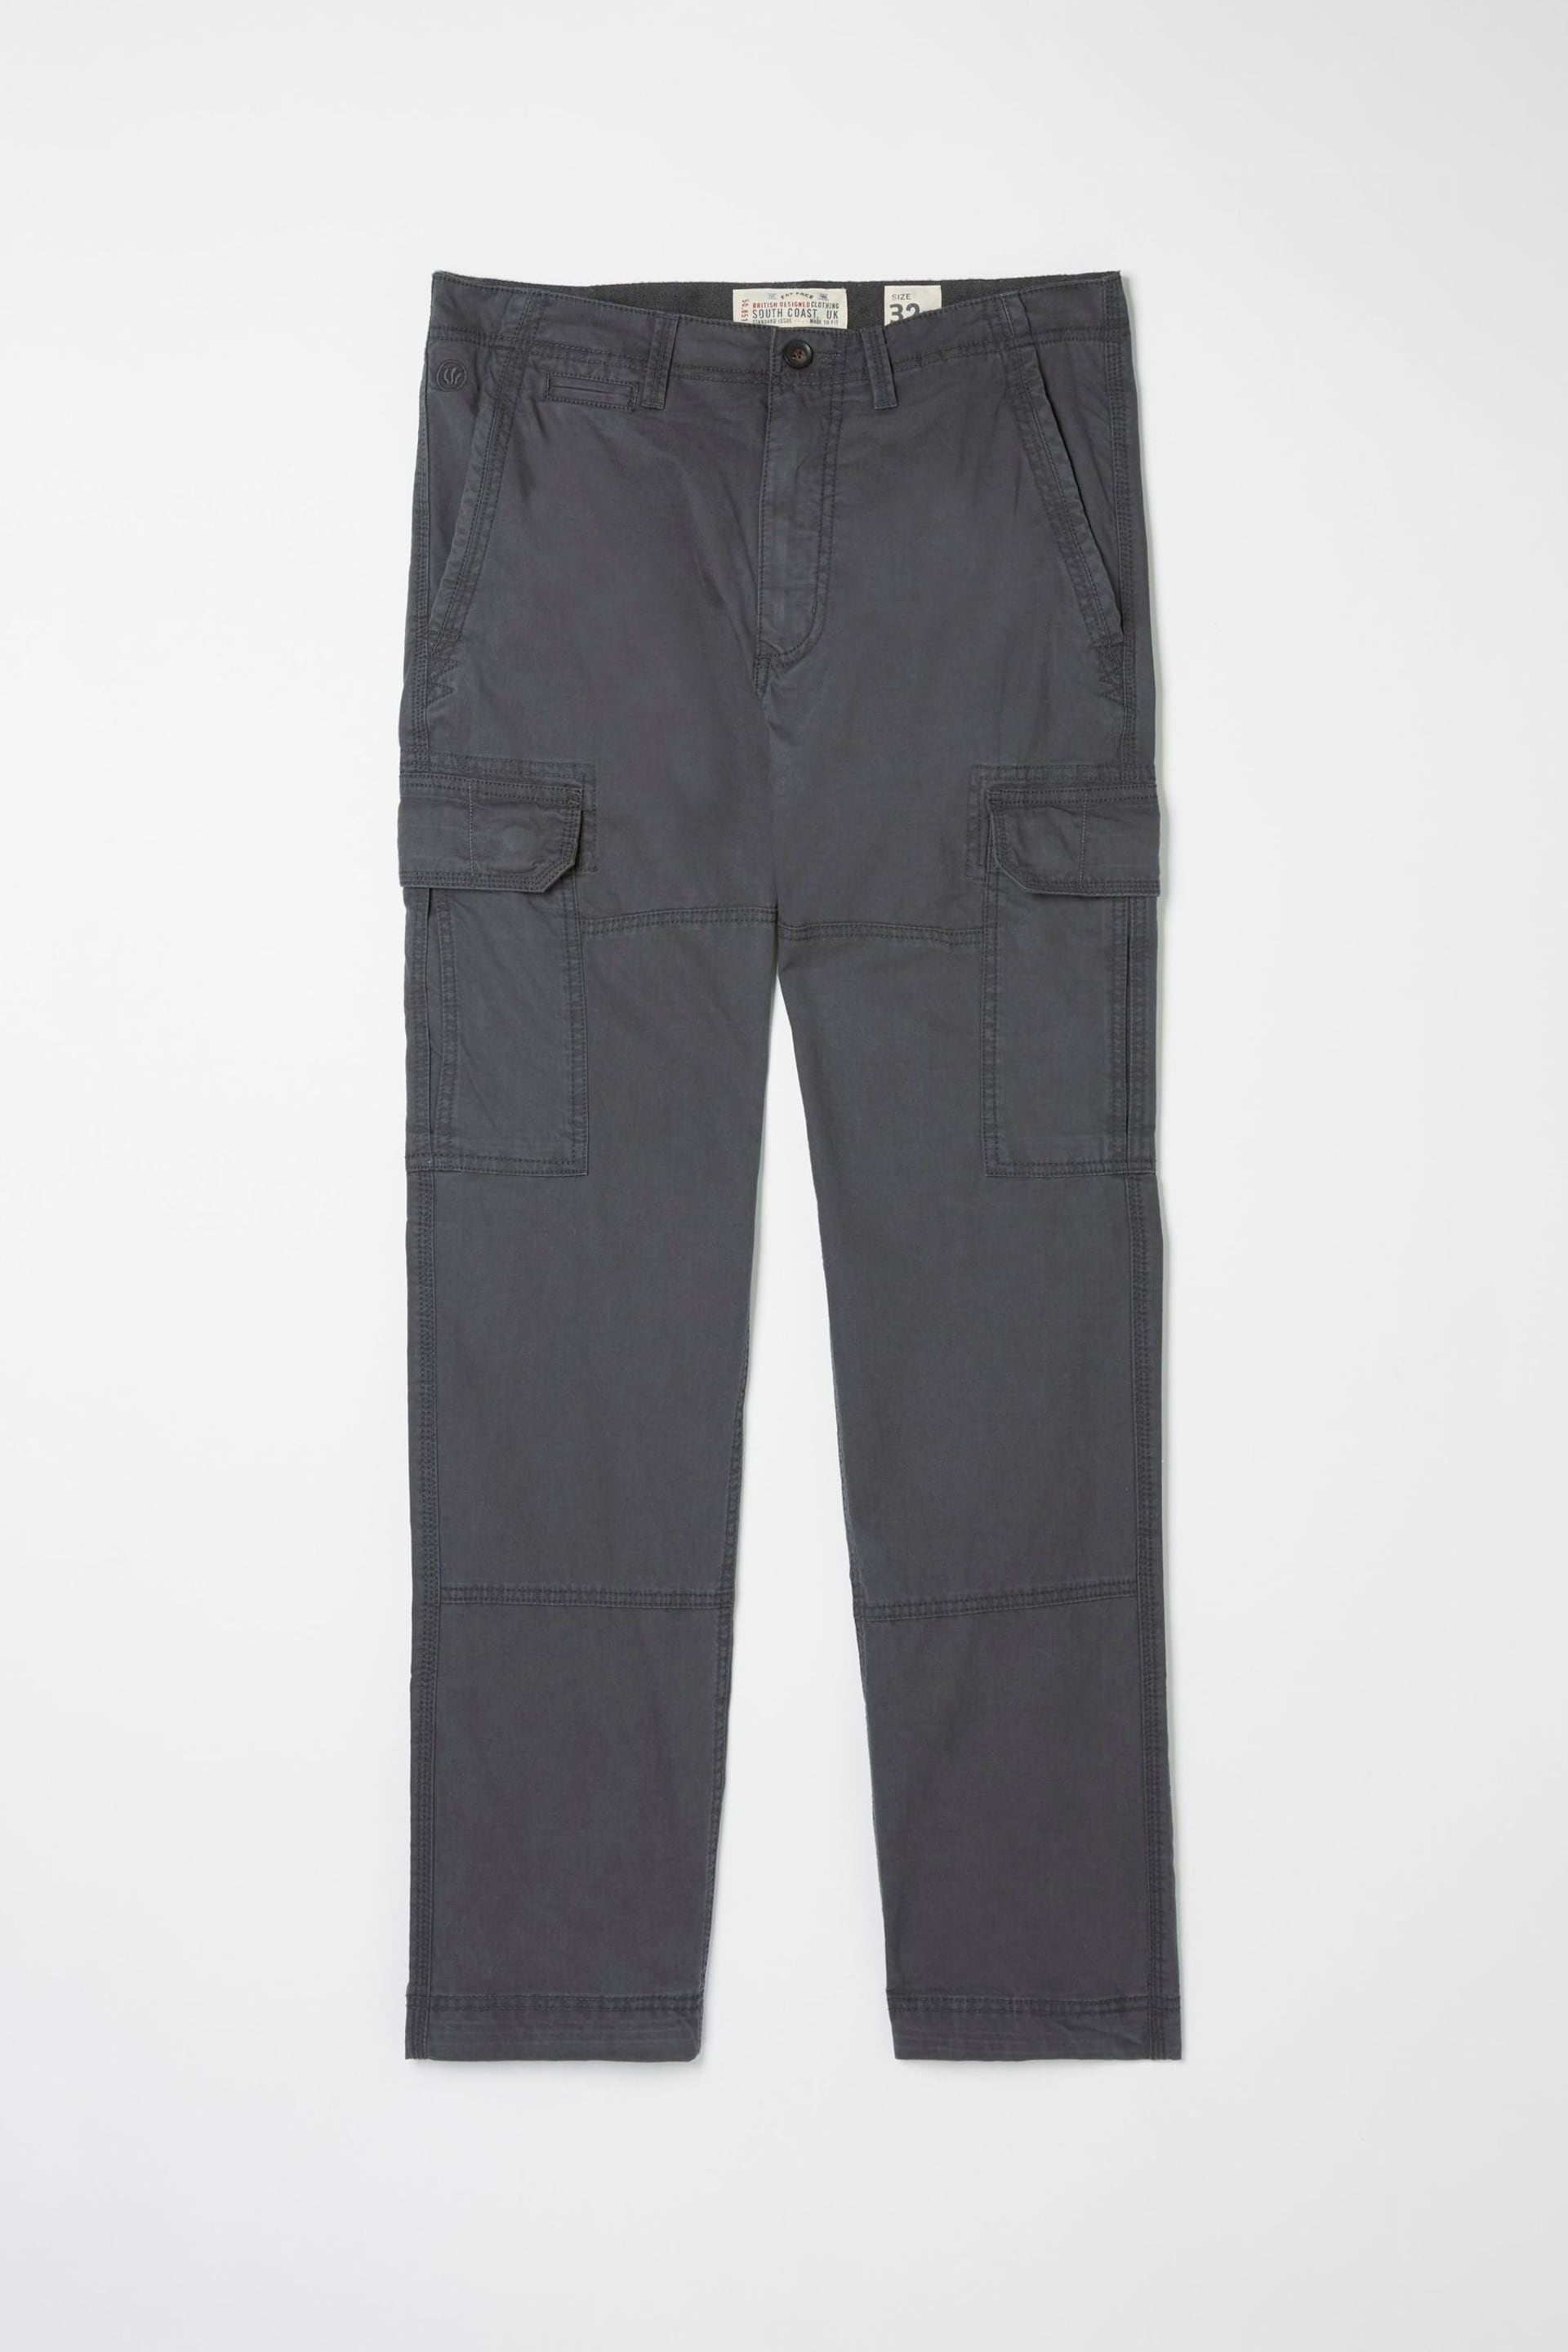 FatFace Grey Corby Ripstop Cargo Trousers - Image 5 of 5